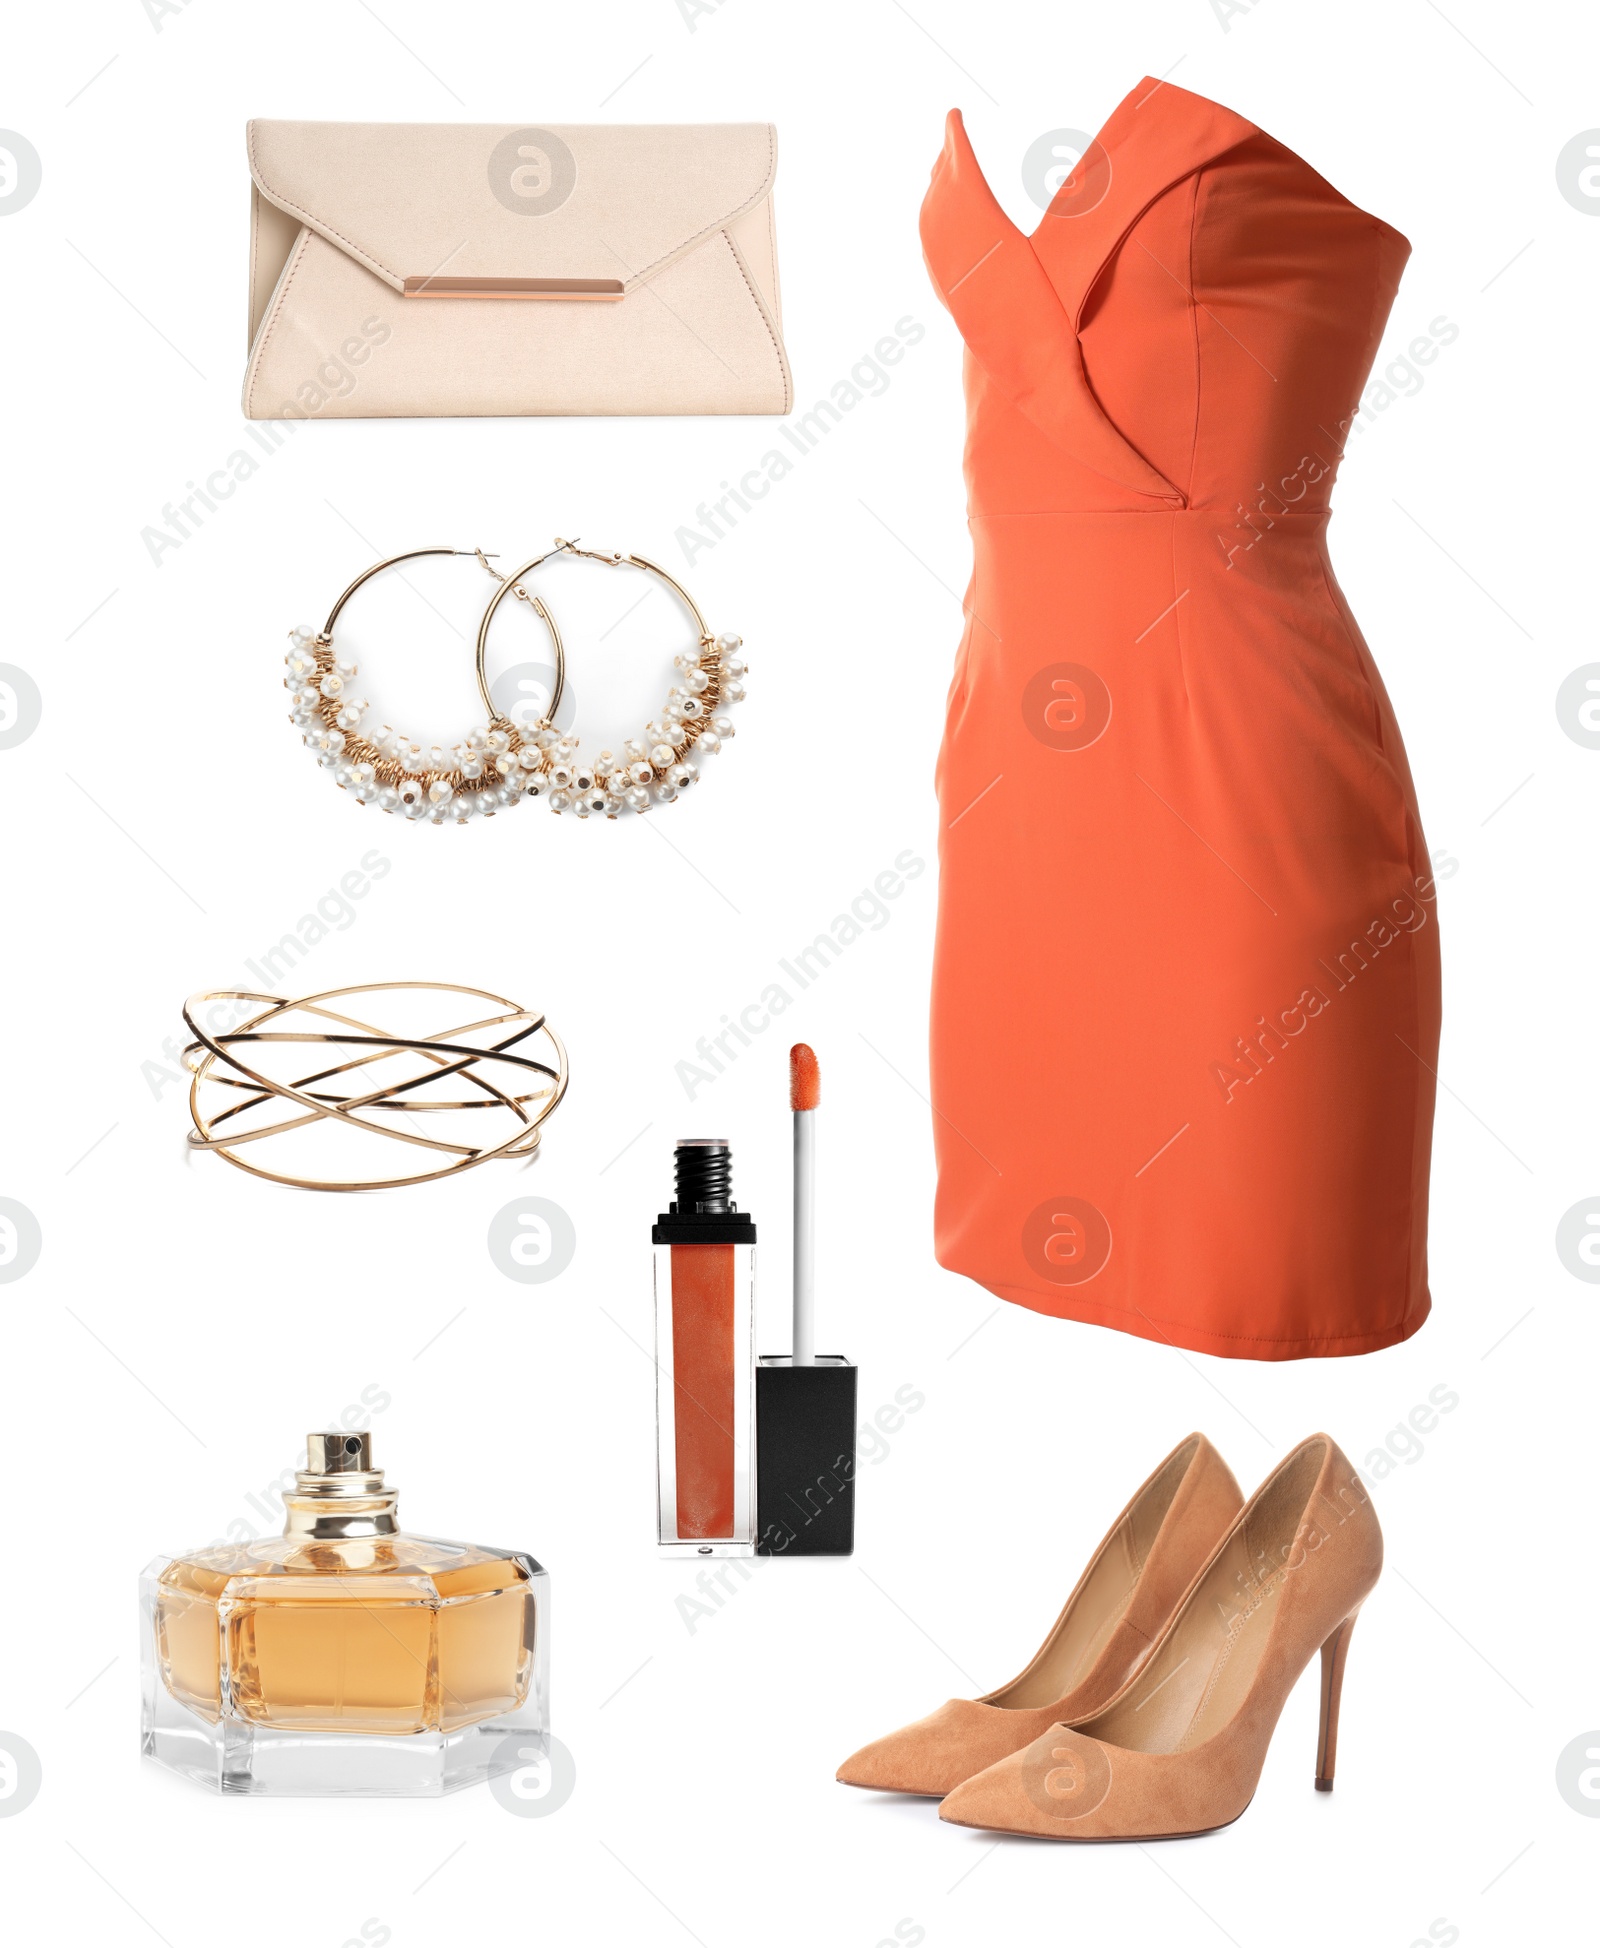 Image of Elegant outfit. Collage with dress, shoes, accessories and cosmetics for woman on white background